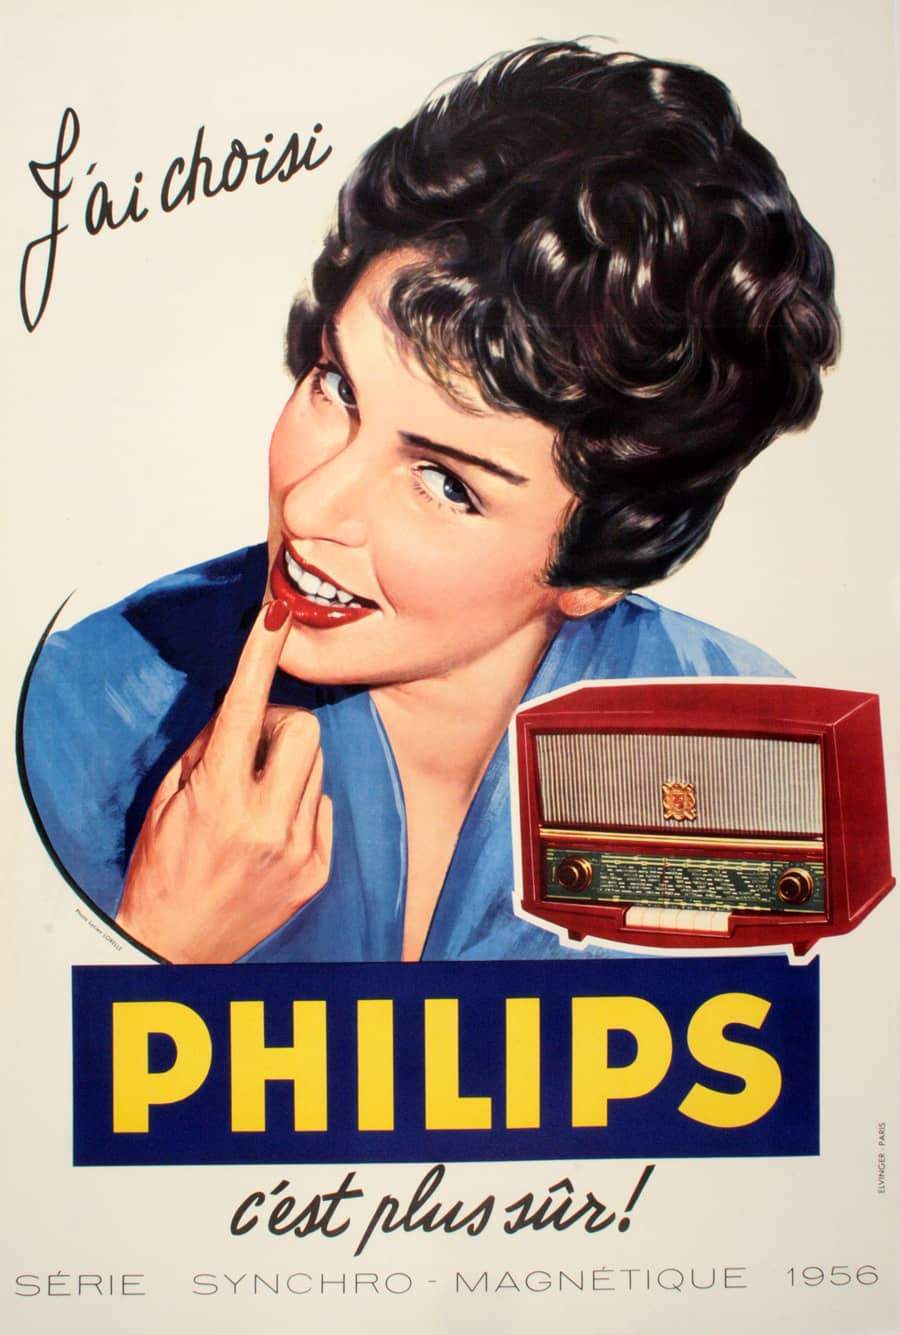 Original Philips Poster 1956 - J'ai Choisi by Lorelle - Large Format